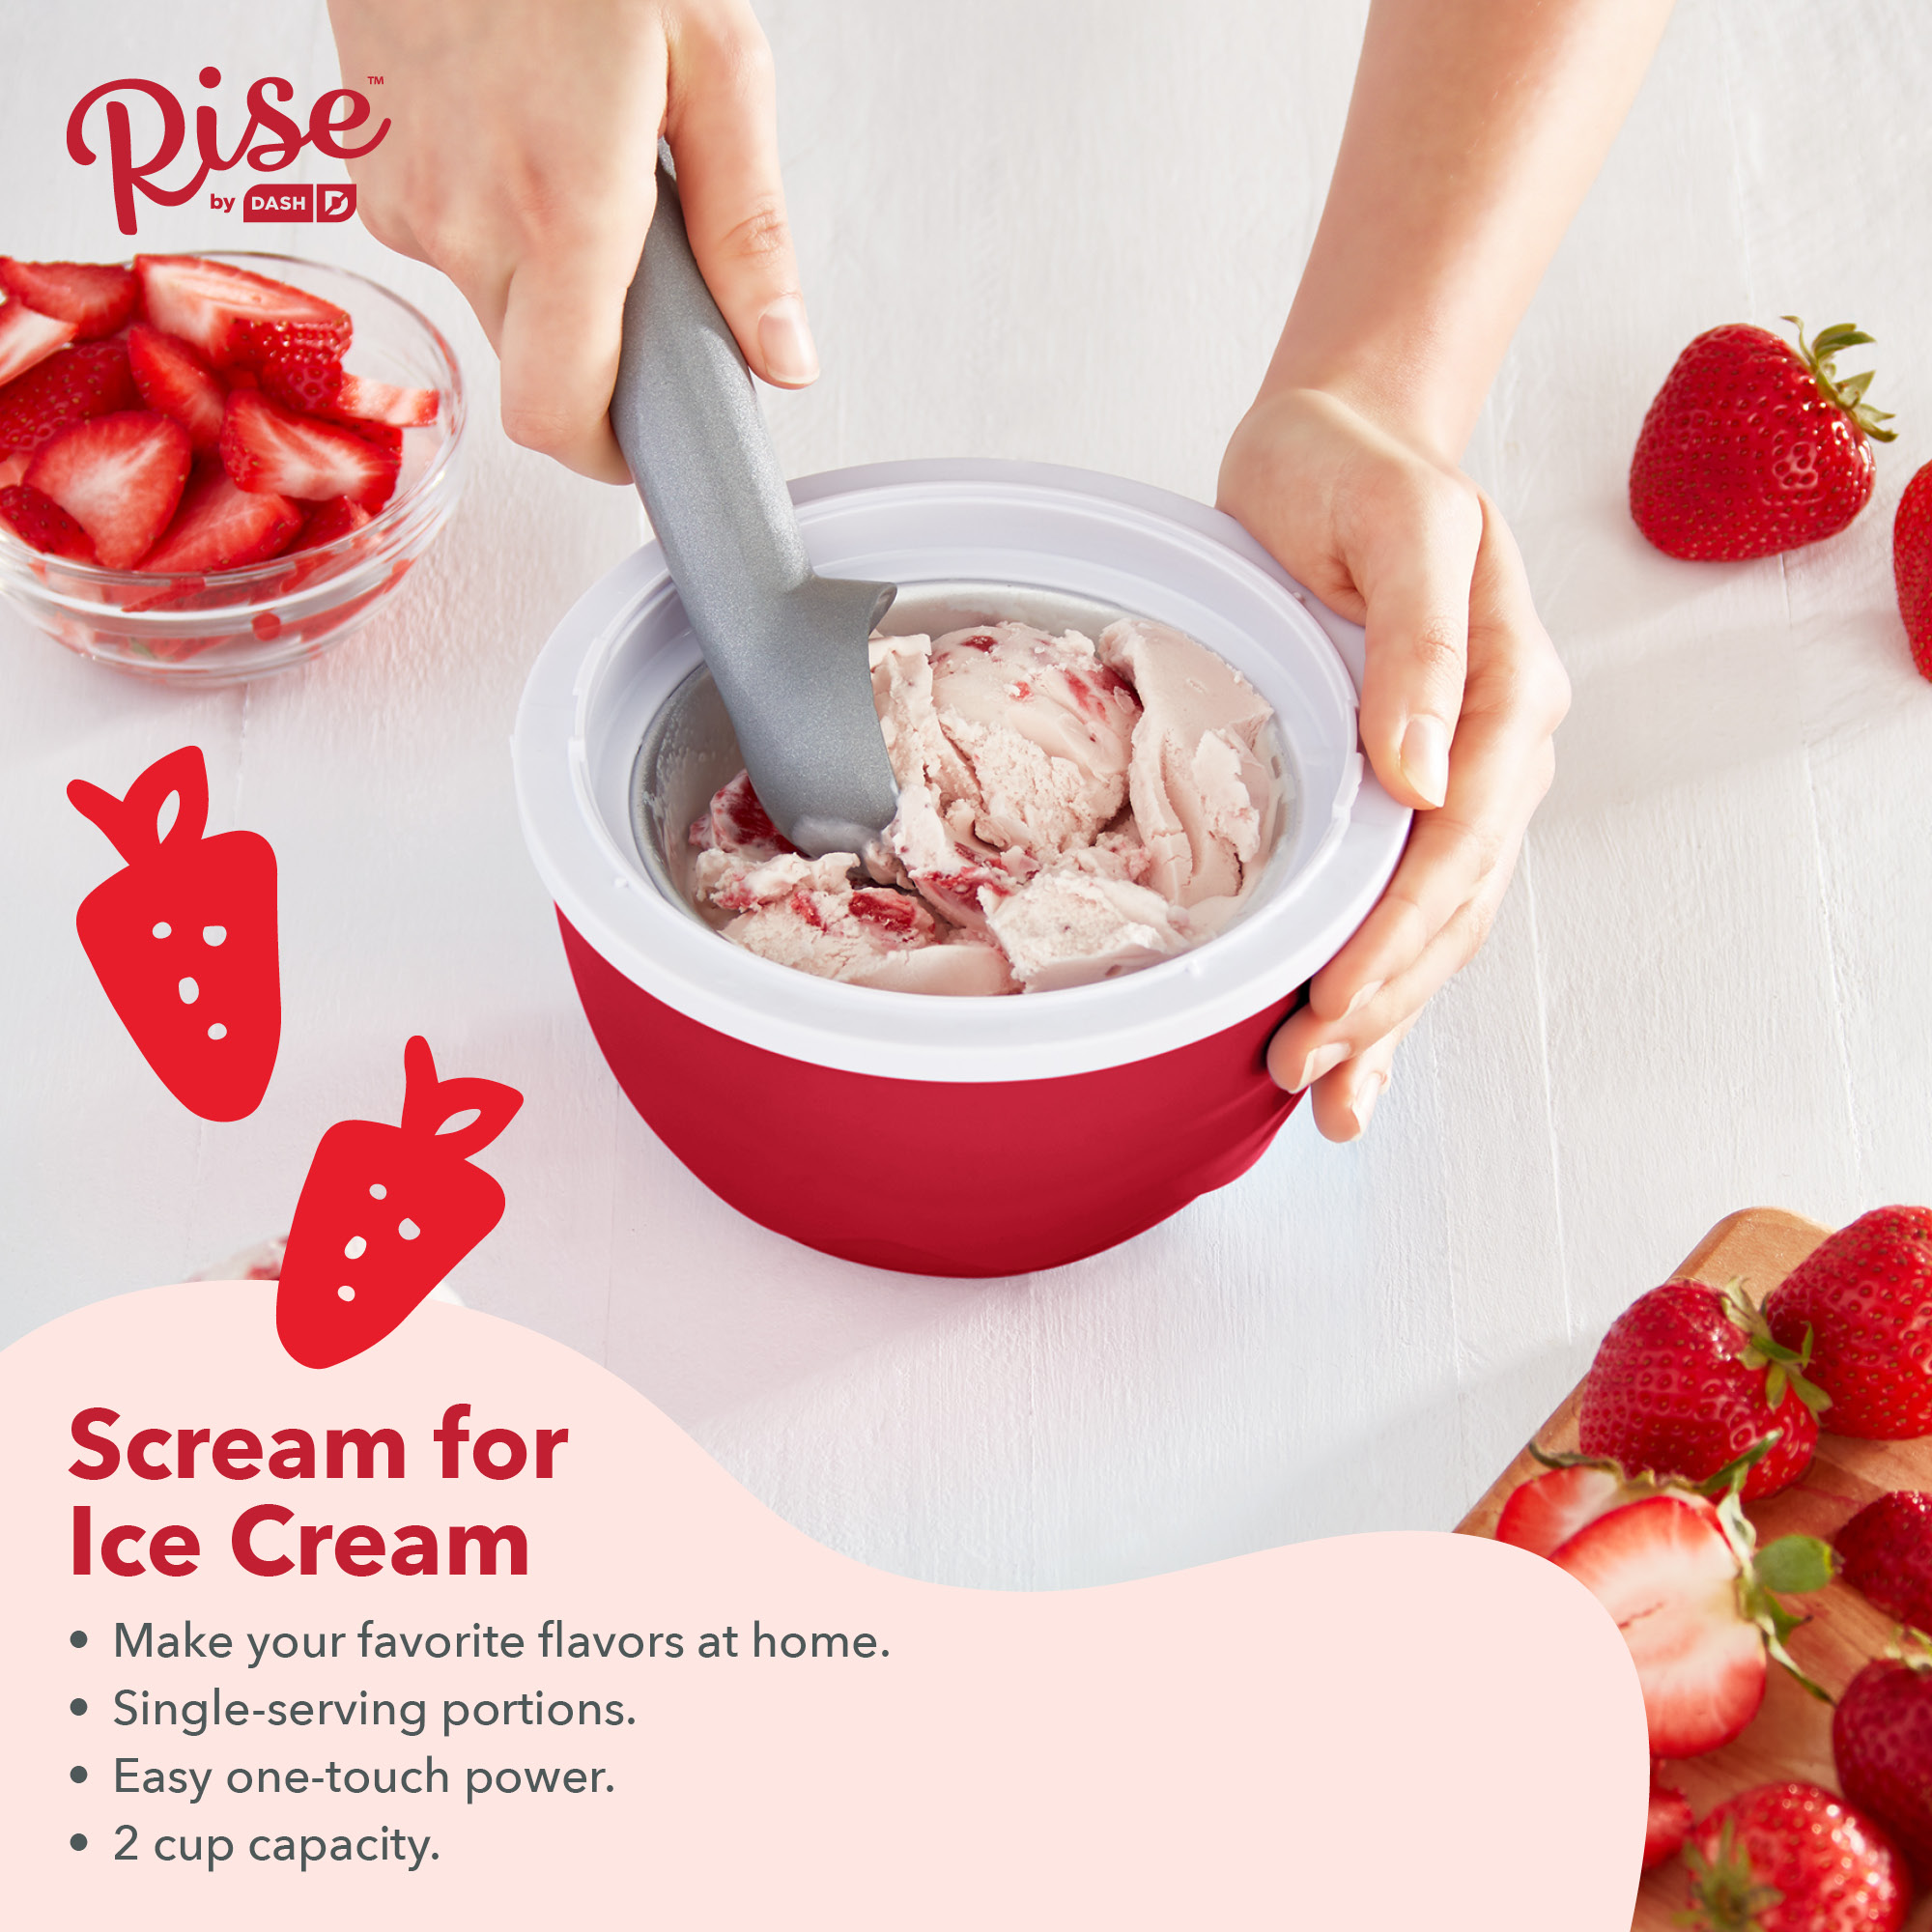 Rise by Dash Personal Electric Ice Cream Maker for Gelato, Sorbet + Frozen Yogurt (Healthy Snacks + Dessert for Kids & Adults) - 1 Pint - Red - 2.6 lb. - image 4 of 7